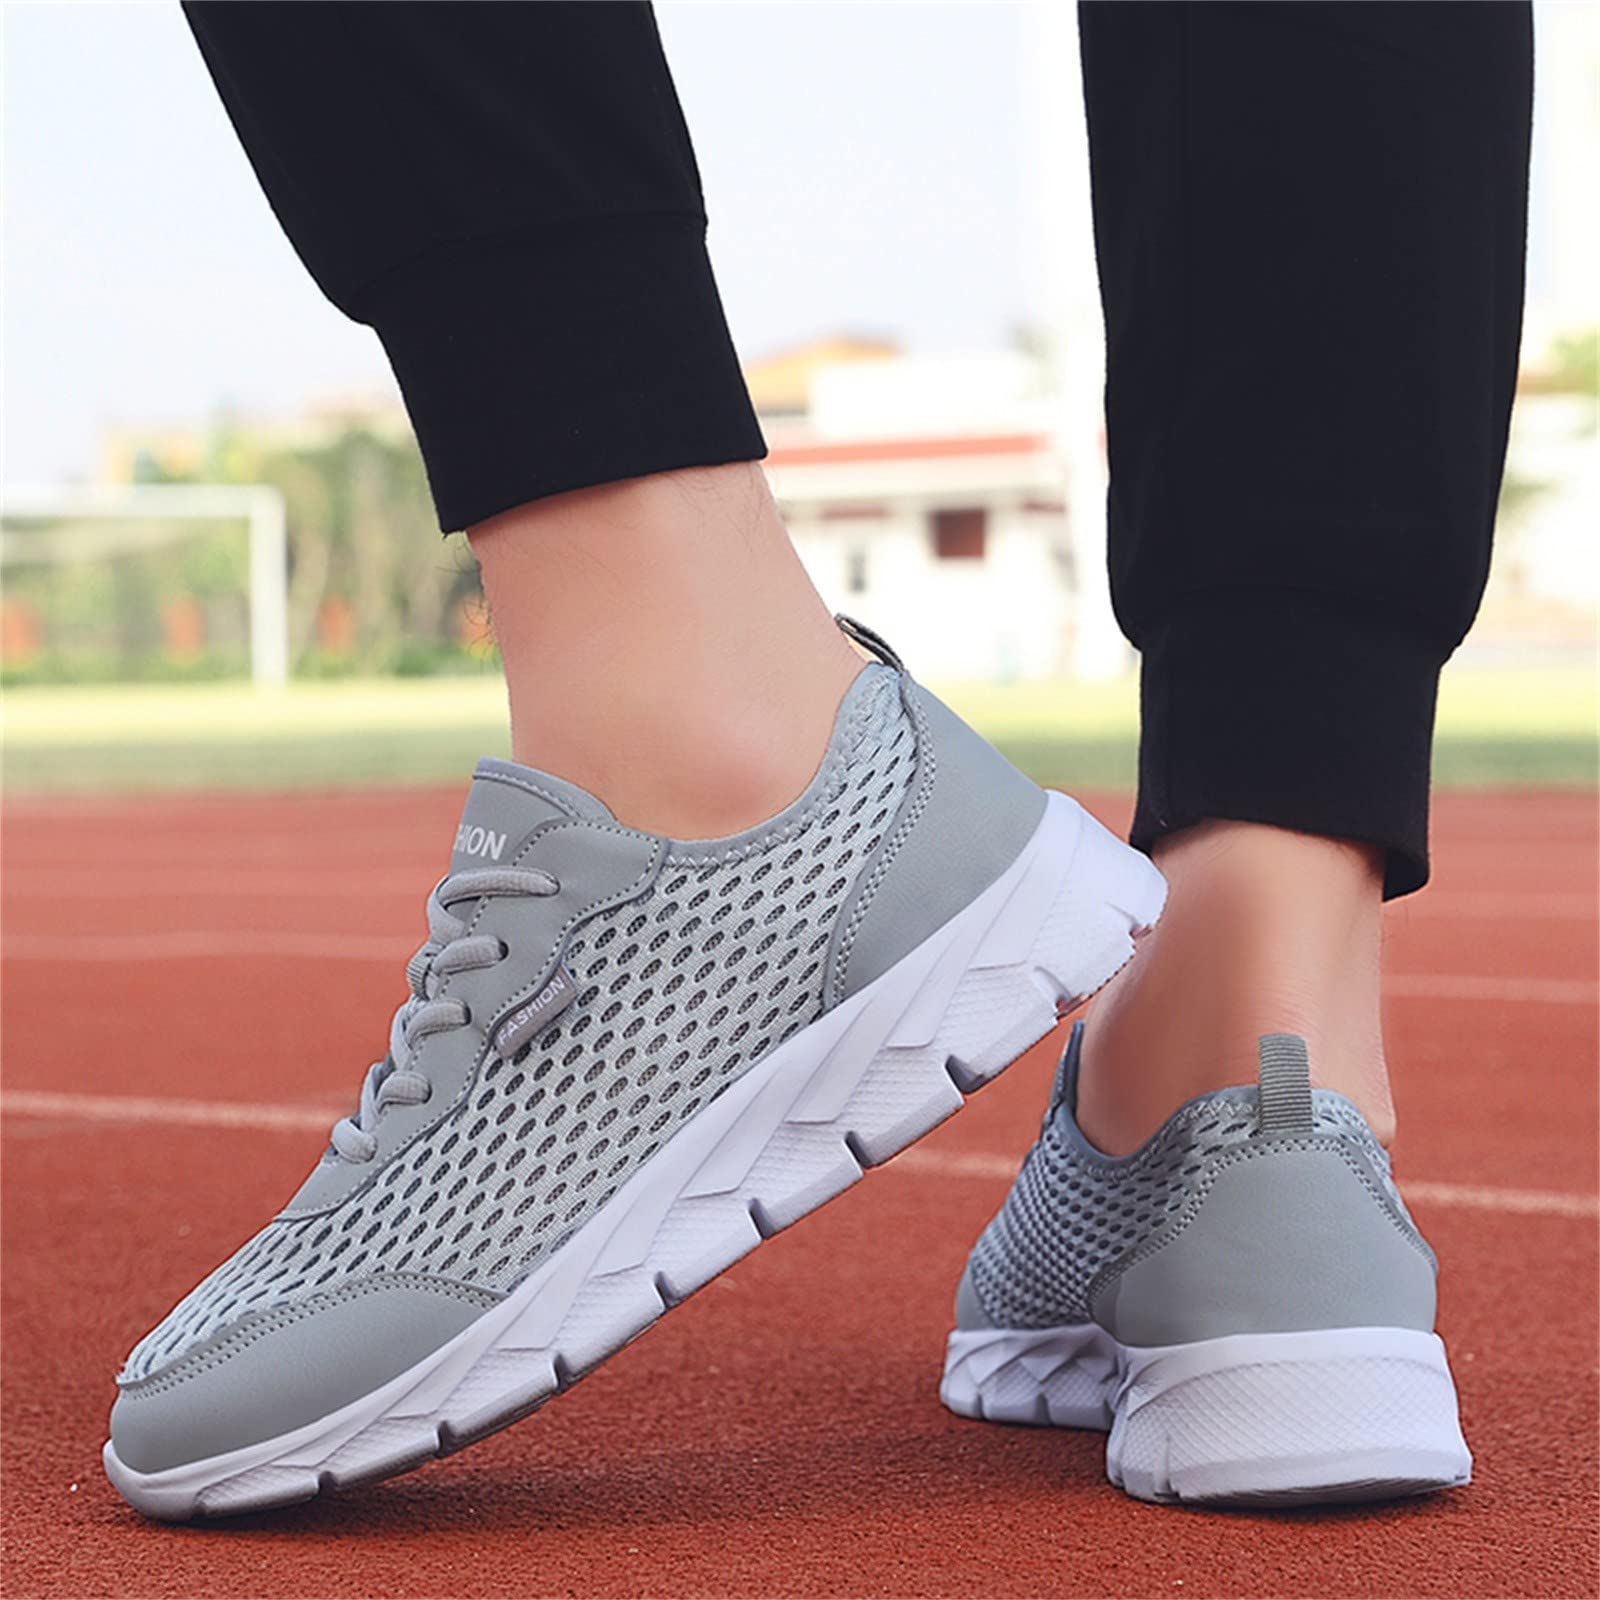 JWSVBF Women Shoes Mesh Knit Orthopedic, Lightweight Sneakers Comfy Walking Strappy, Lightweight Closed Toe Sandals Women Dressy Casual Shoes with Heels Unisex Fashion Autumn A-Grey